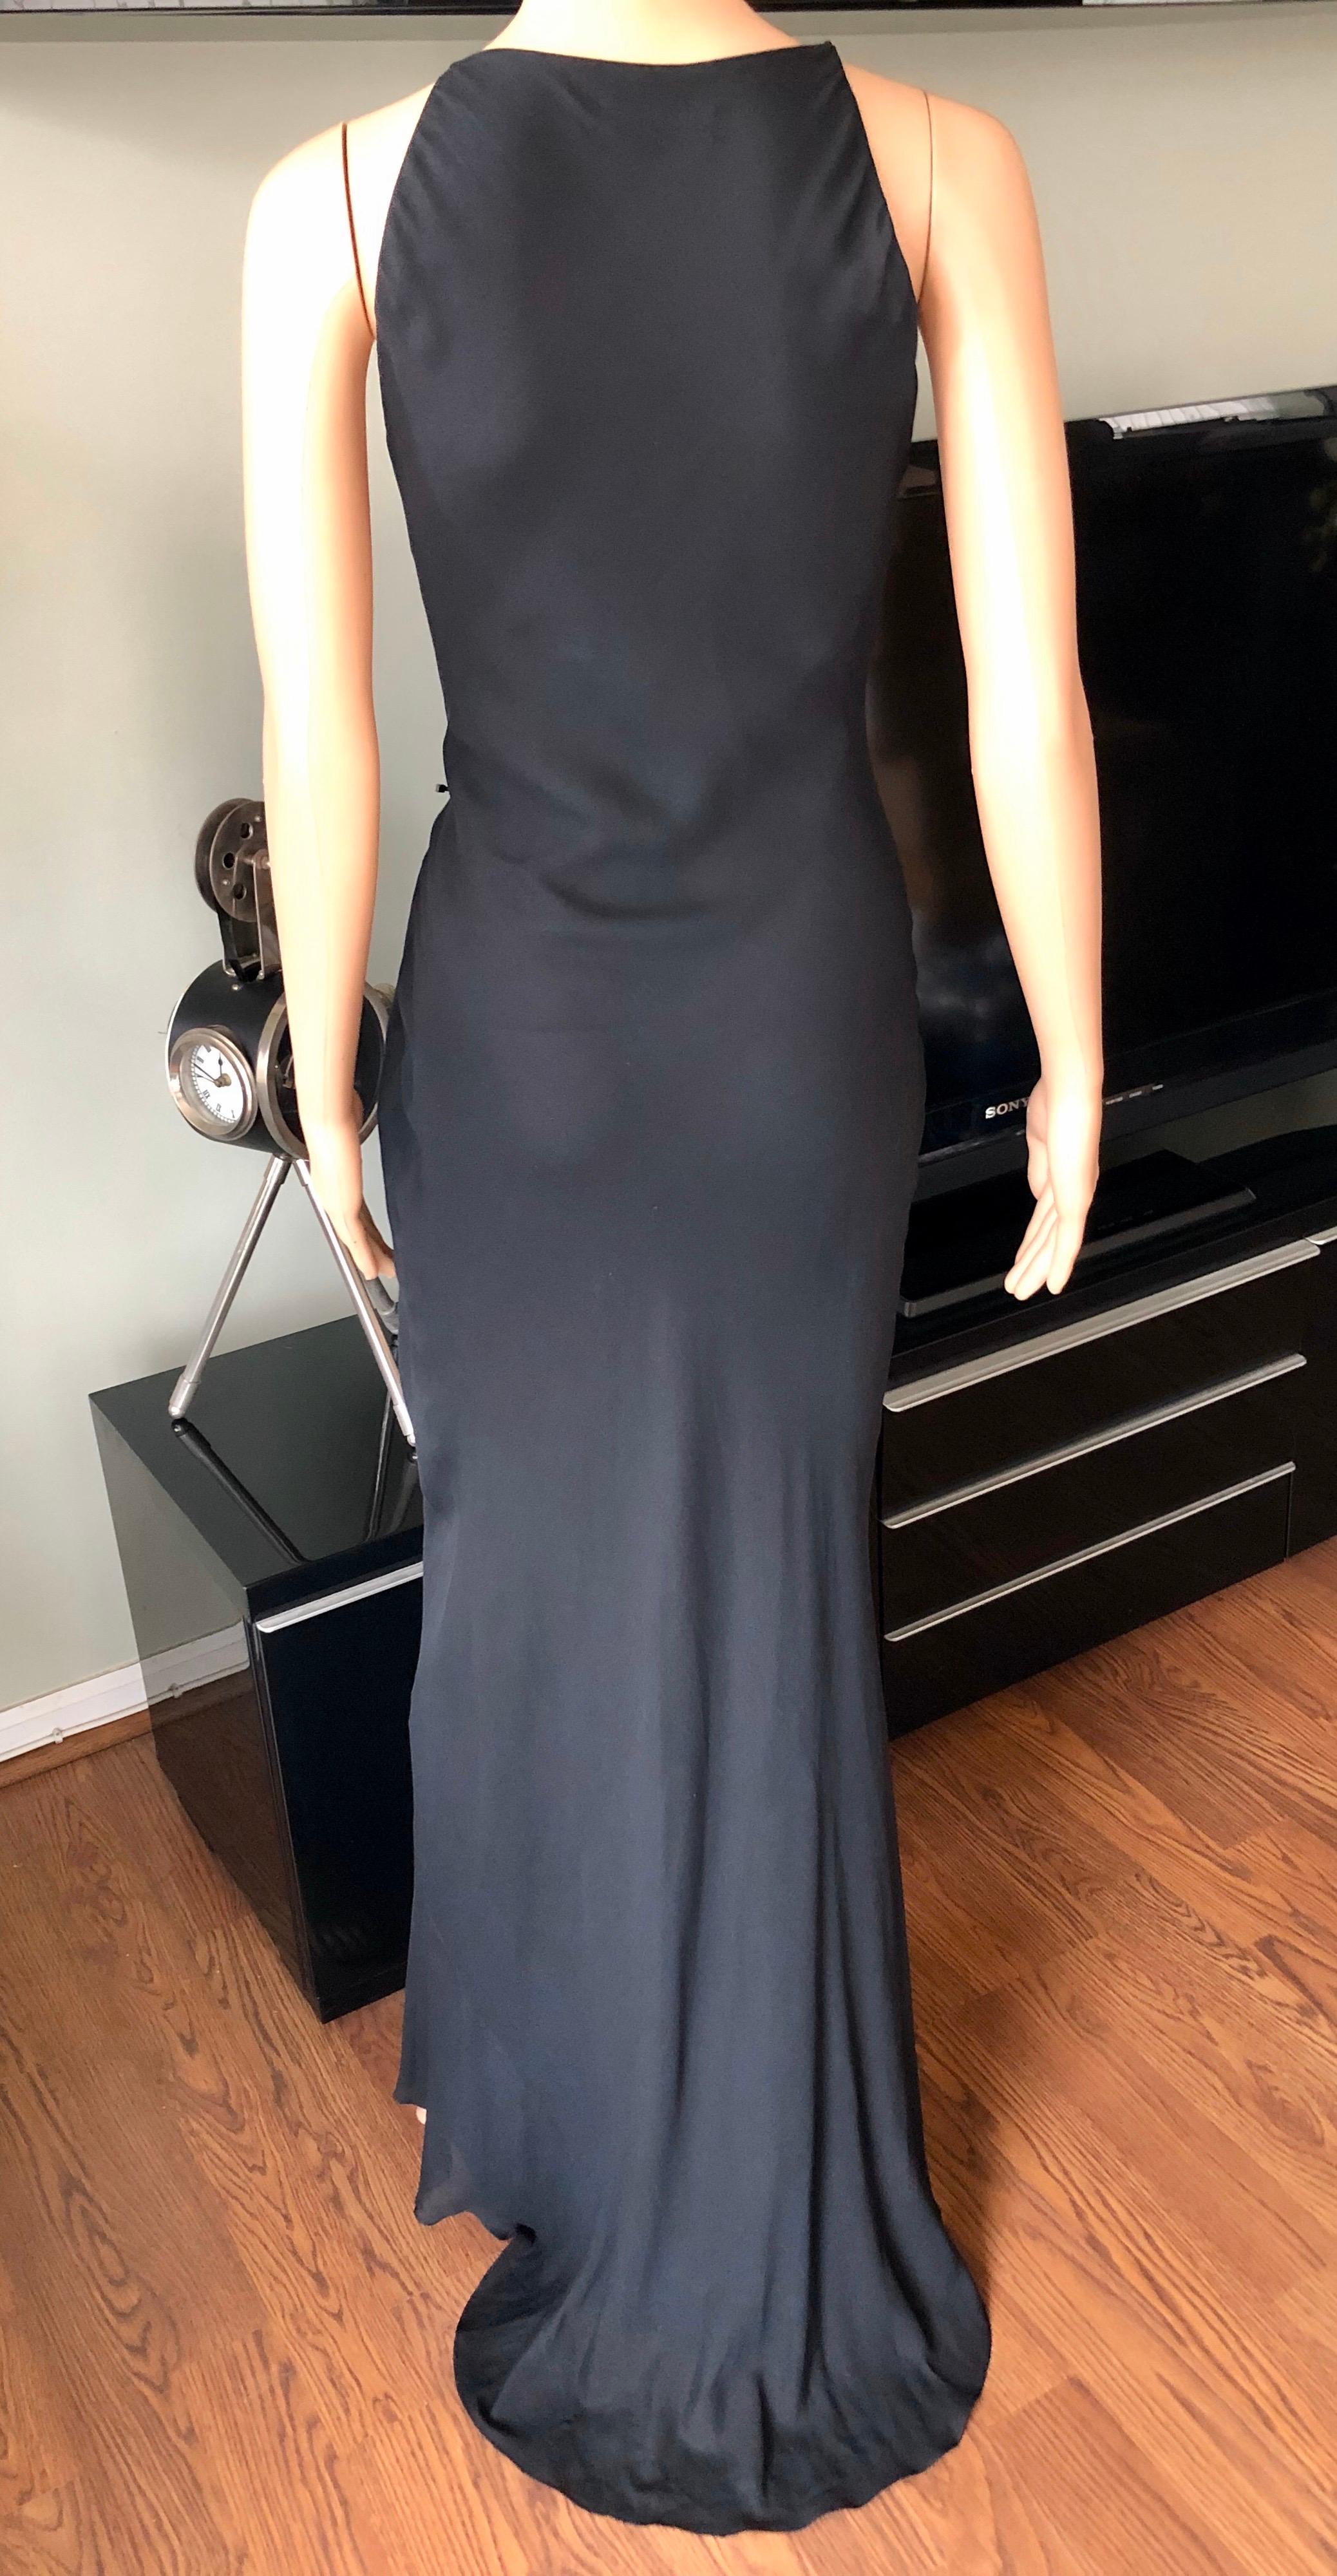 Tom Ford for Gucci c. 2000 Sheer Silk Black Maxi Evening Dress IT 40

Gucci by Tom Ford sheer silk maxi dress with V-neck, knotted accent at waist and concealed hook-and-eye closure at shoulder.
